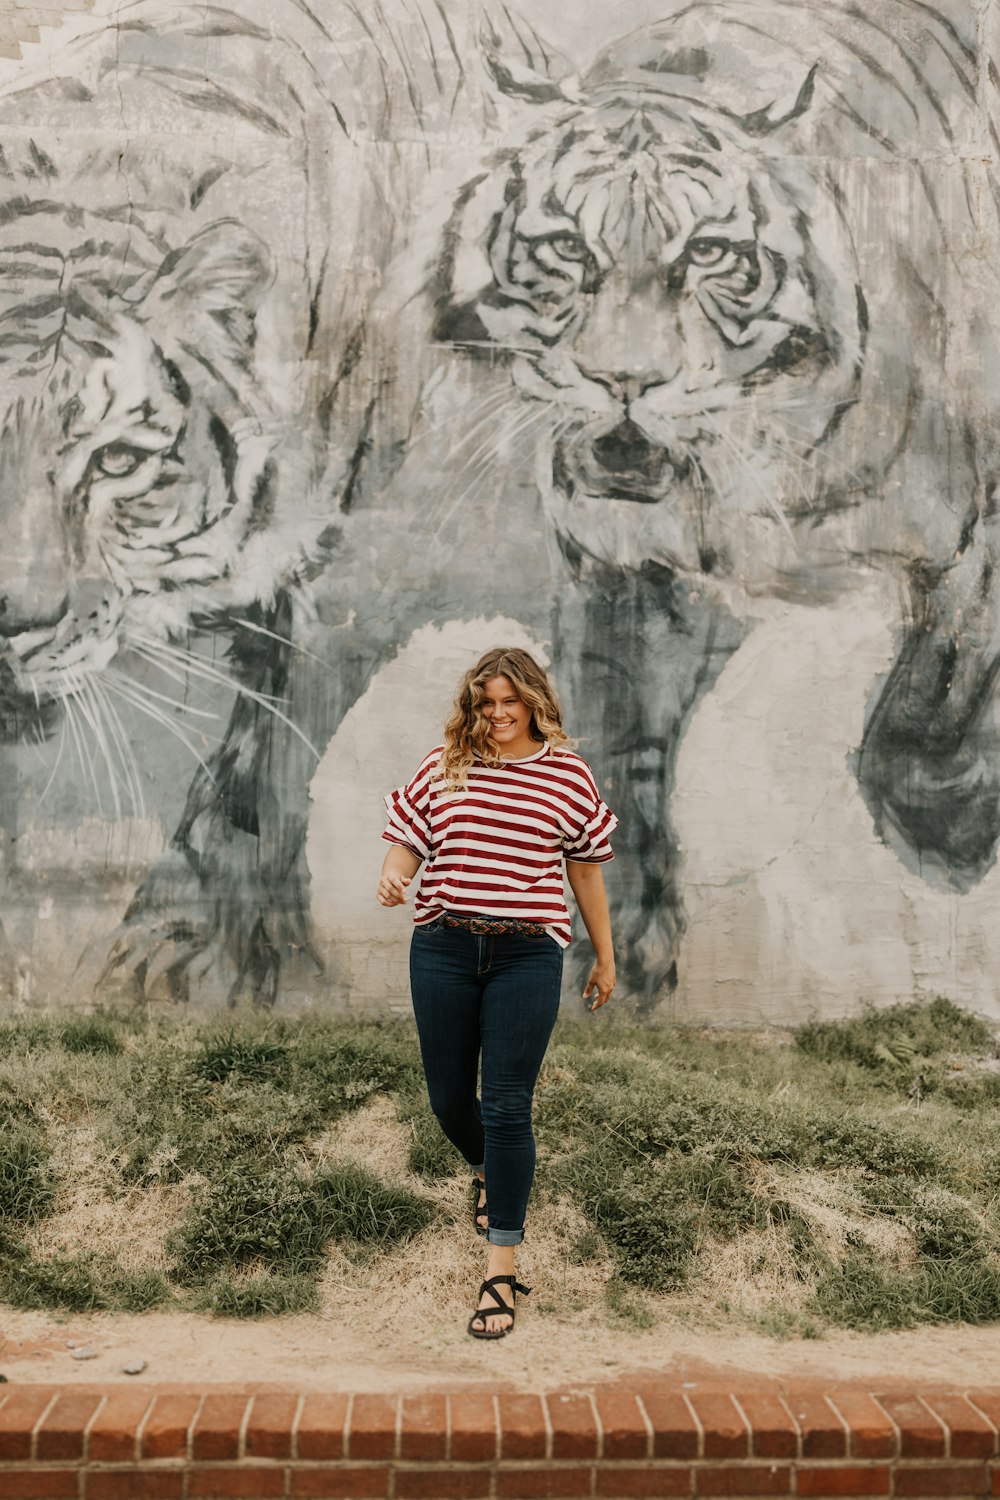 woman in standing beside tiger-printed wall